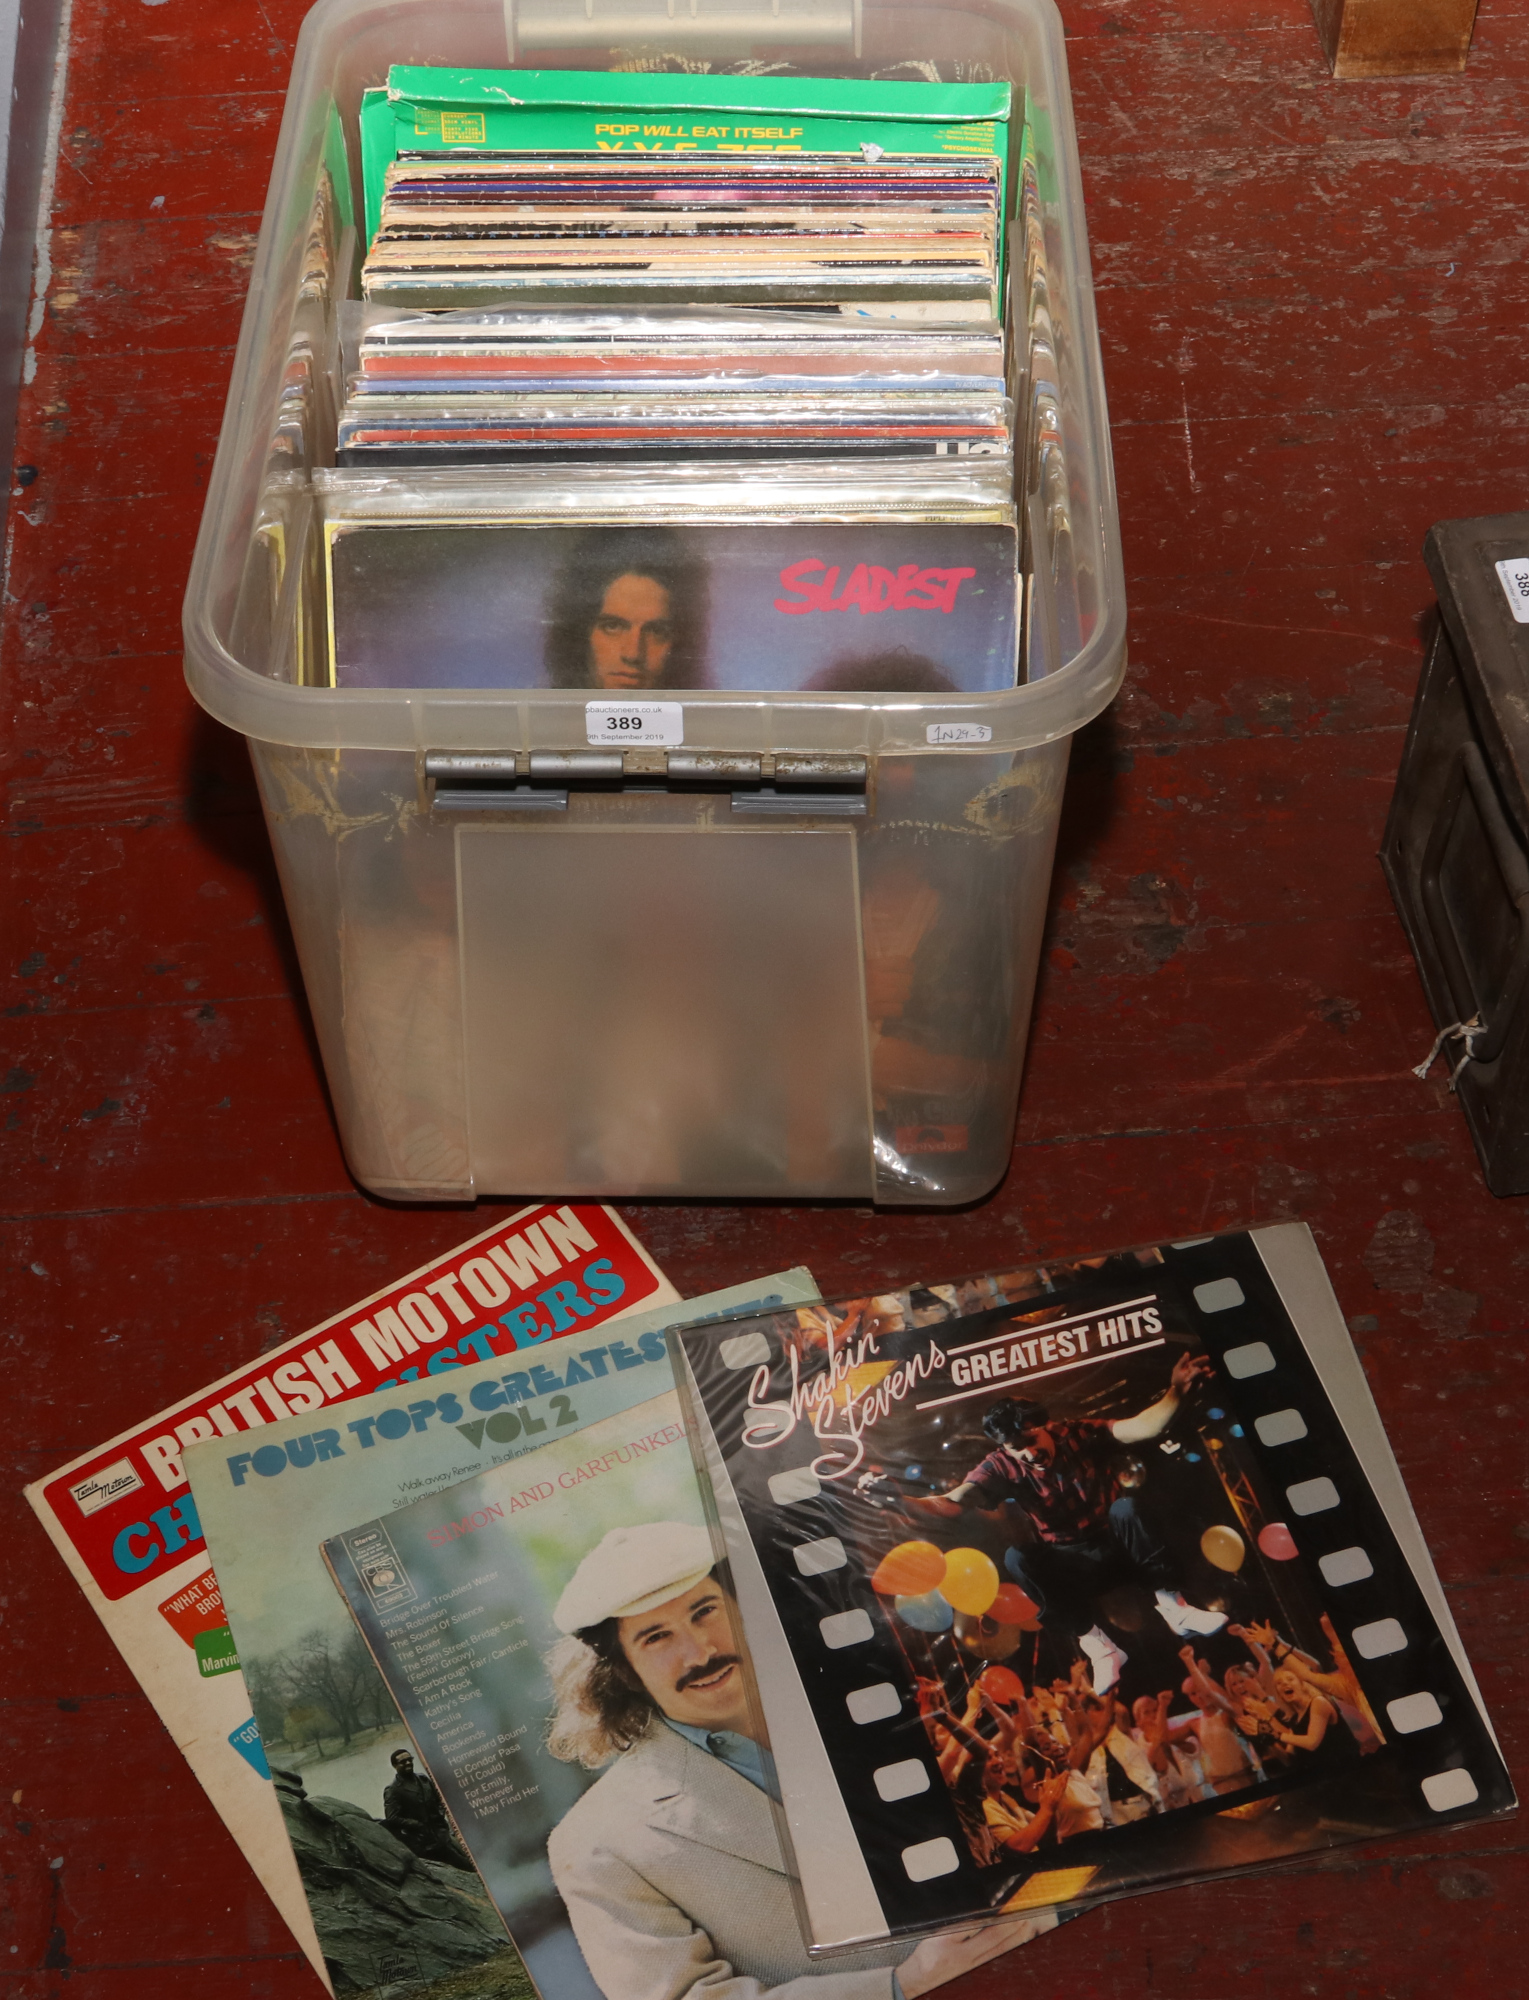 A box of L.P records mostly rock, pop and easy listening including Simon & Garfunkle, Shakin